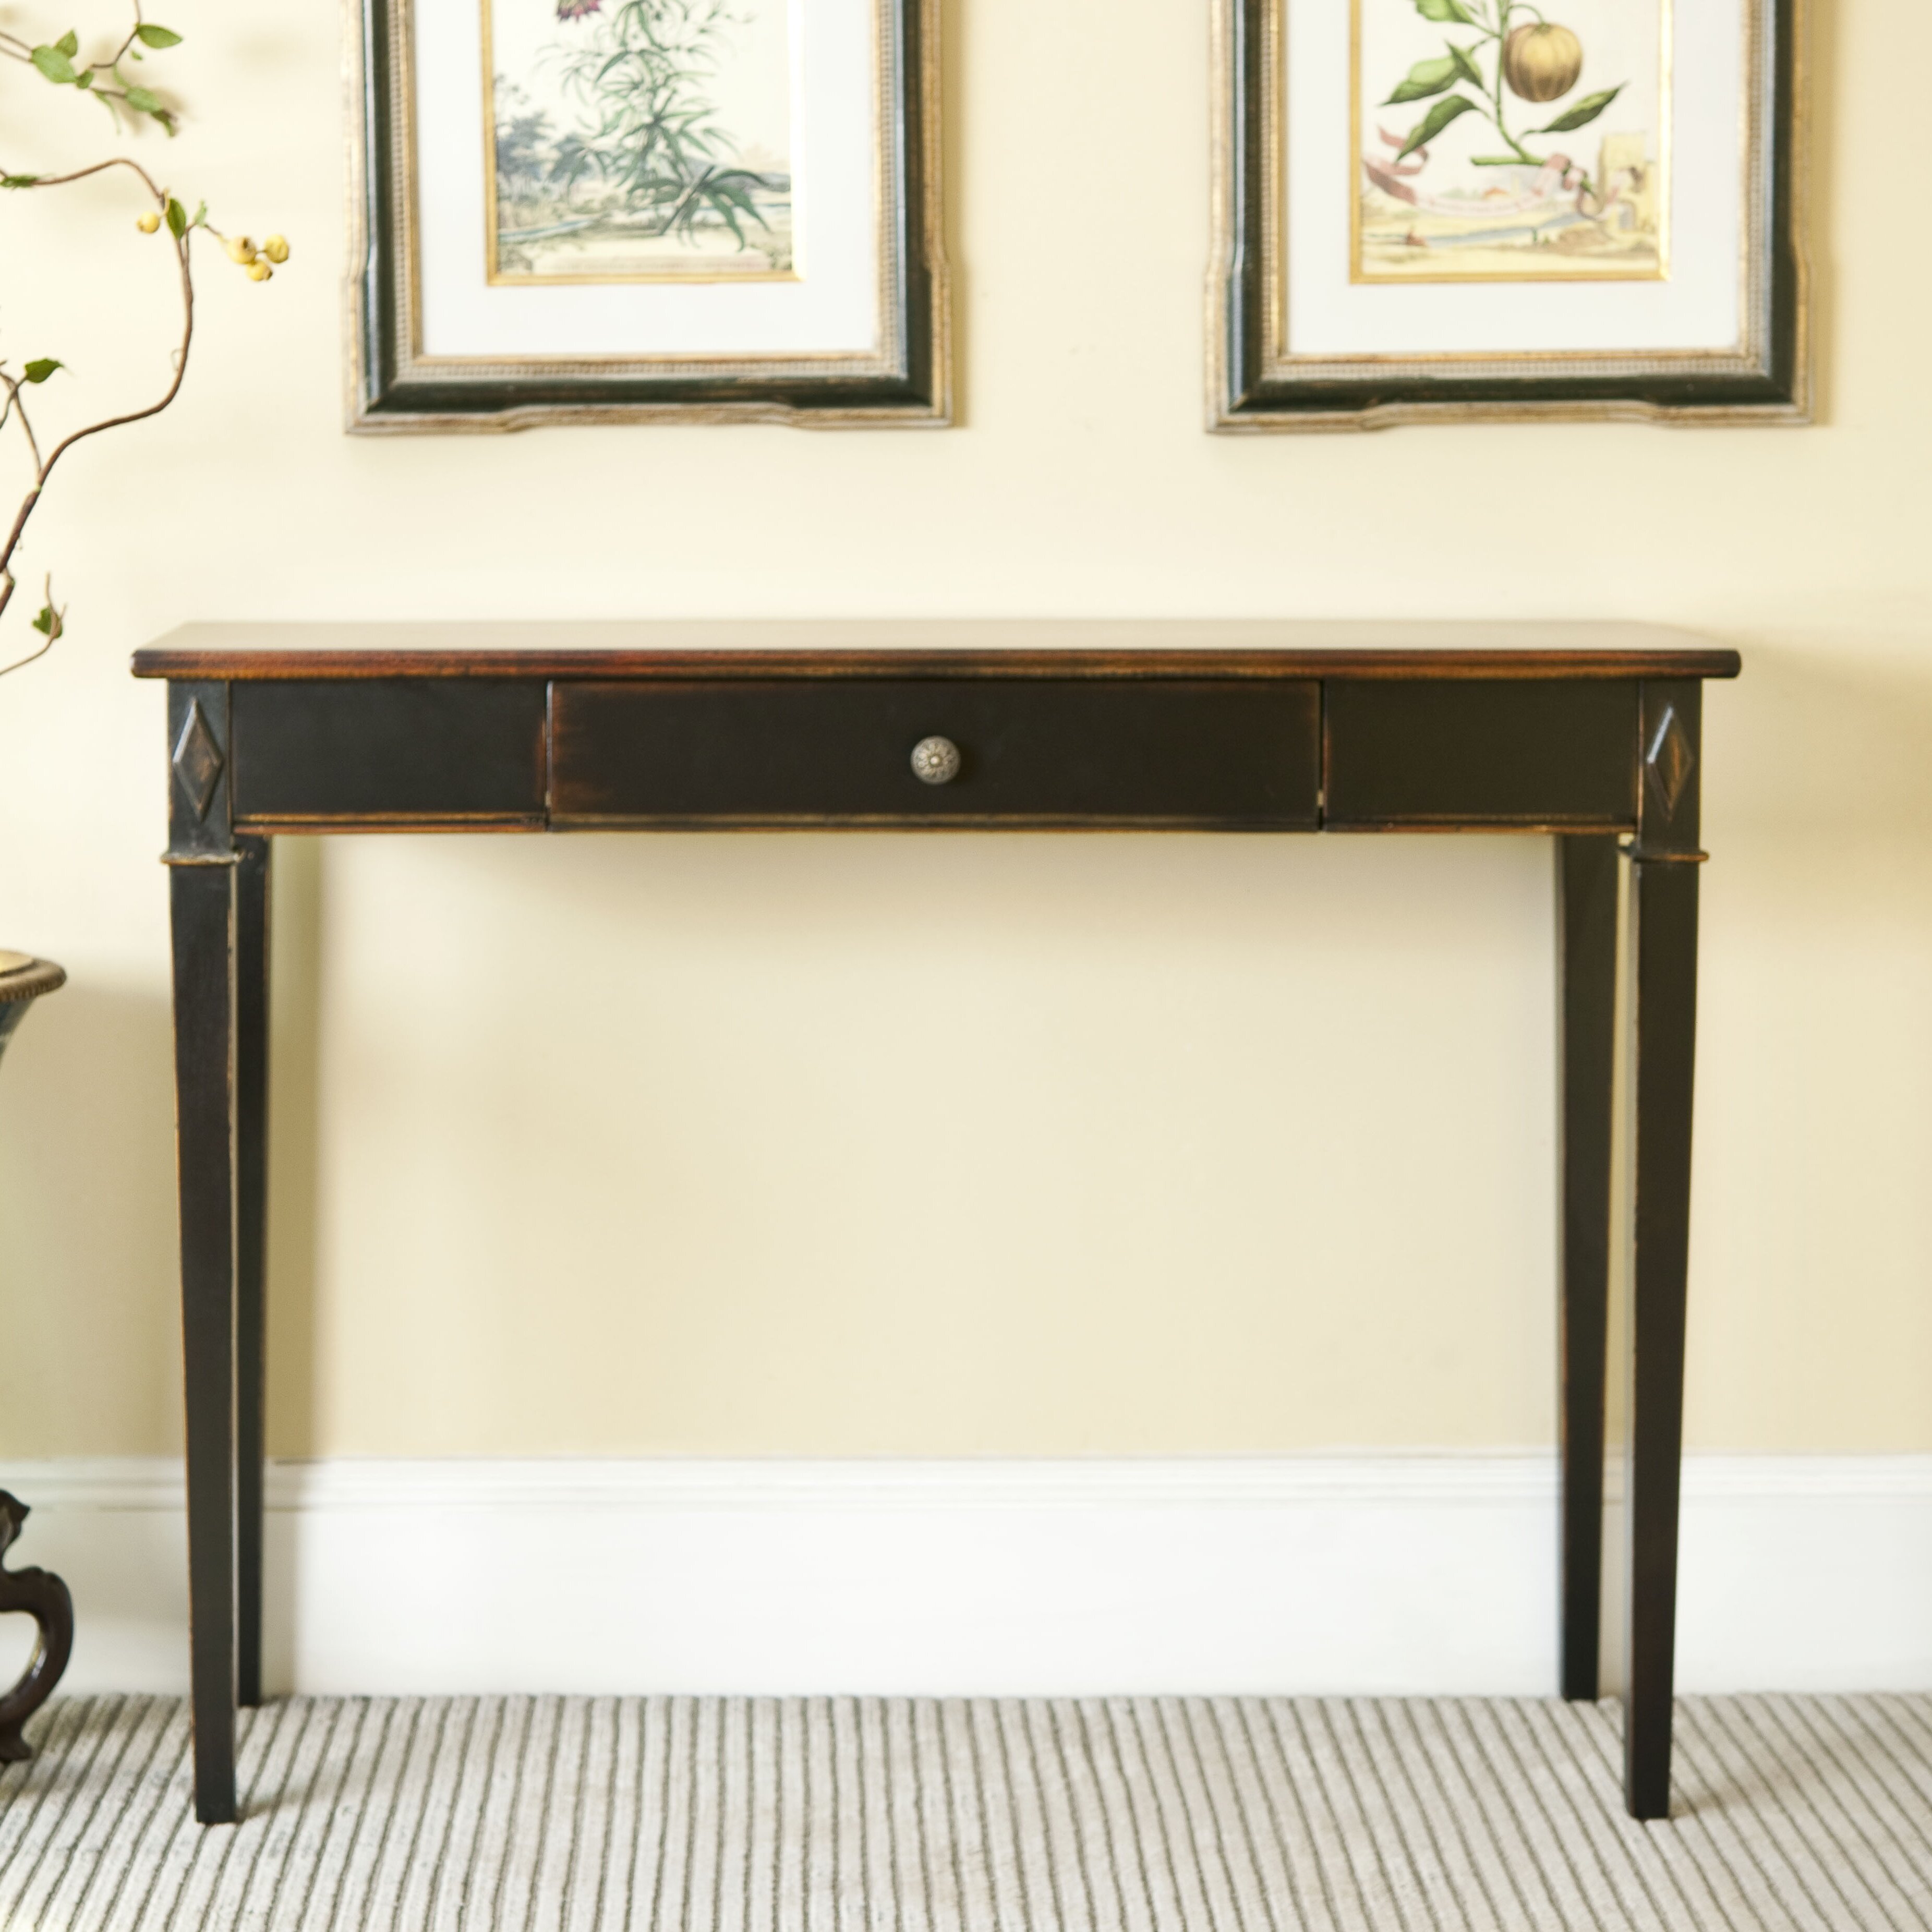 Safavieh Lindy One Drawer Console Table & Reviews Wayfair